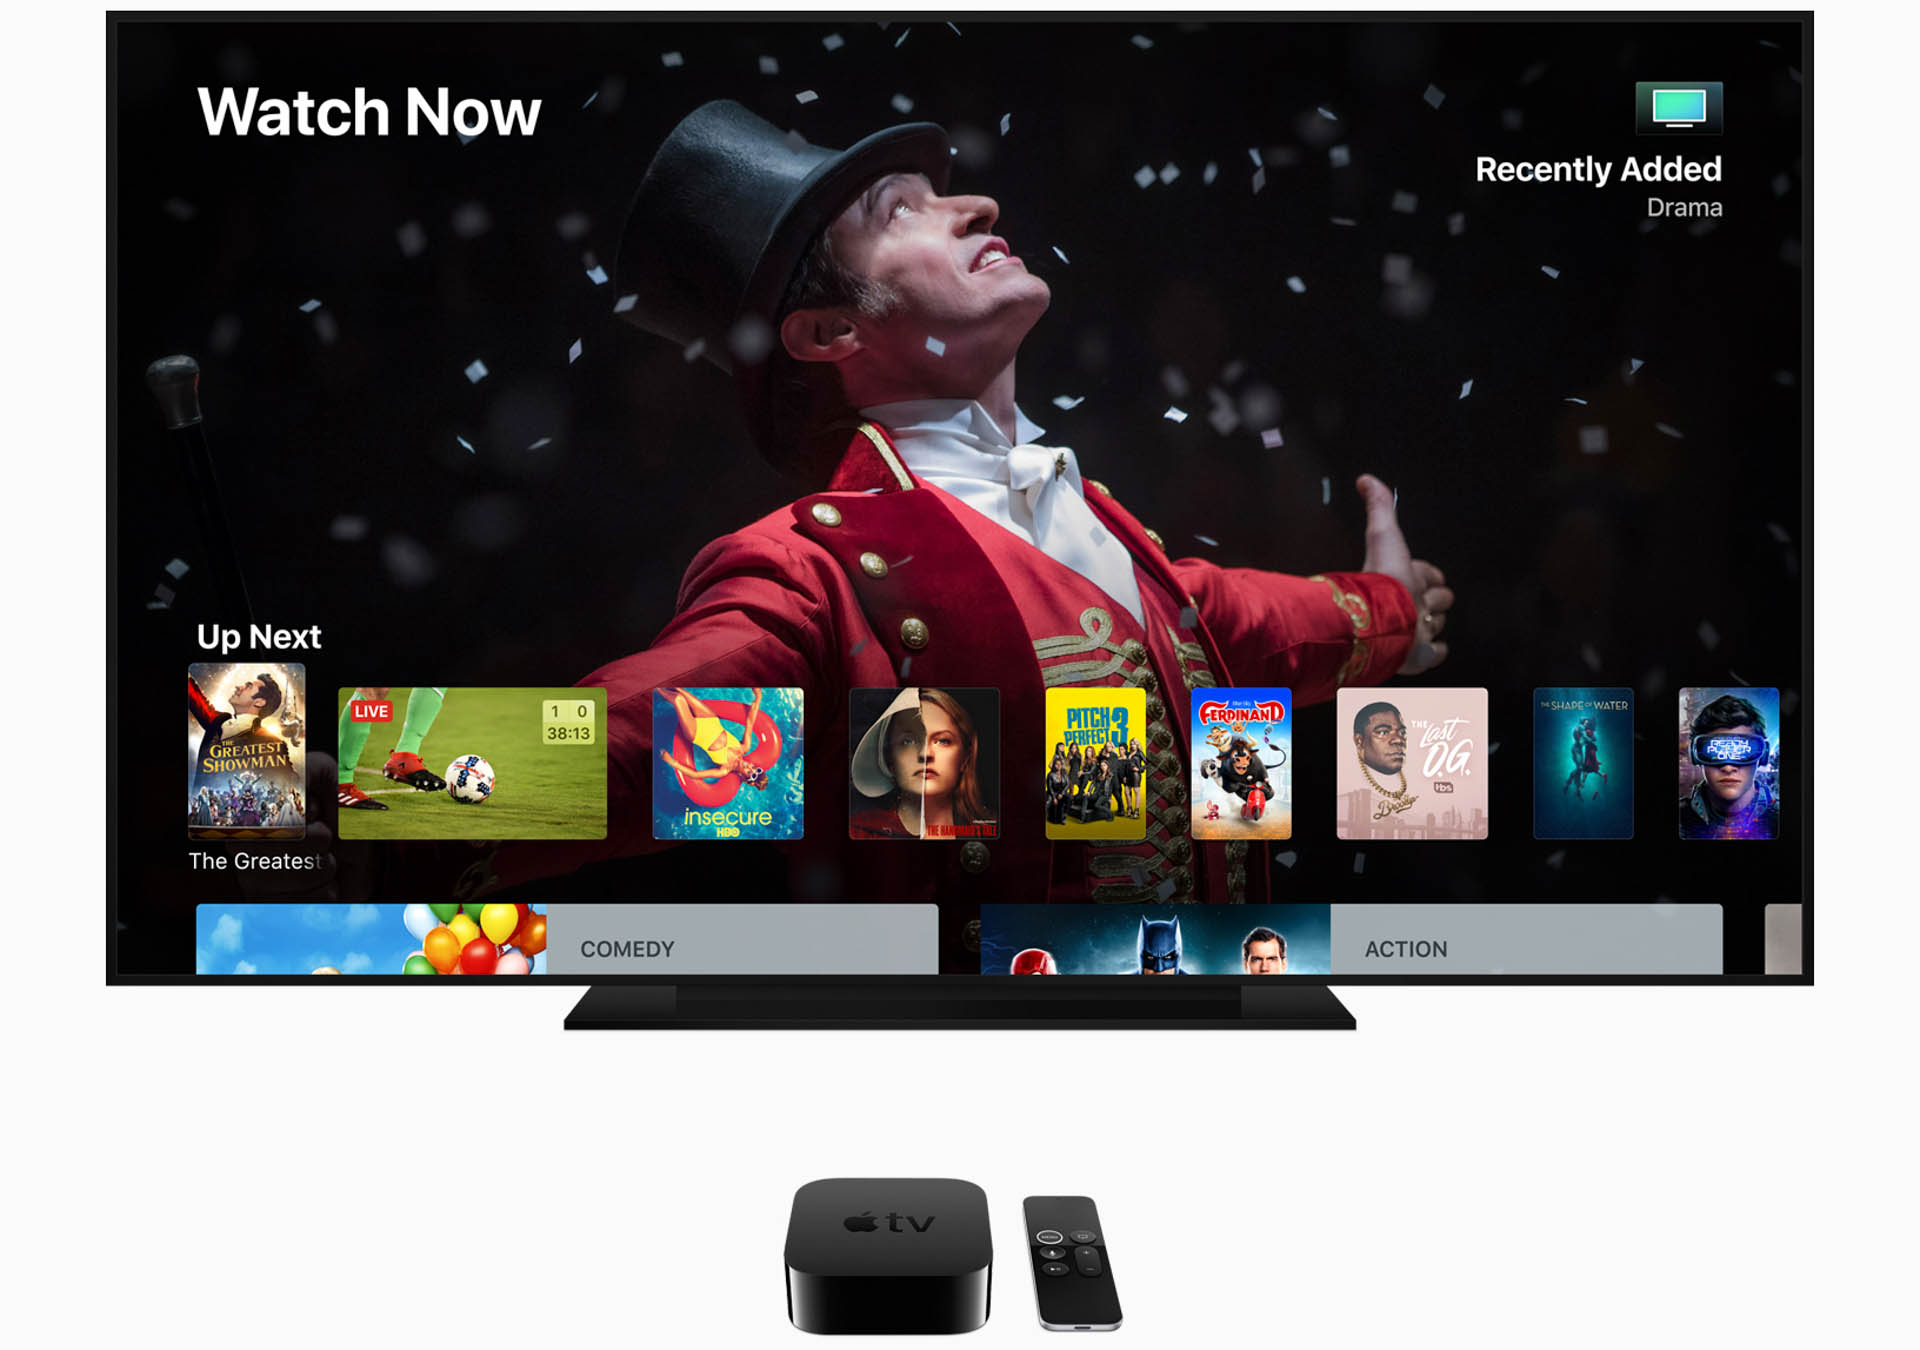 Smart 4K TVs and set-top boxes like Apple TV 4K open up a world of streaming. Image: Apple.